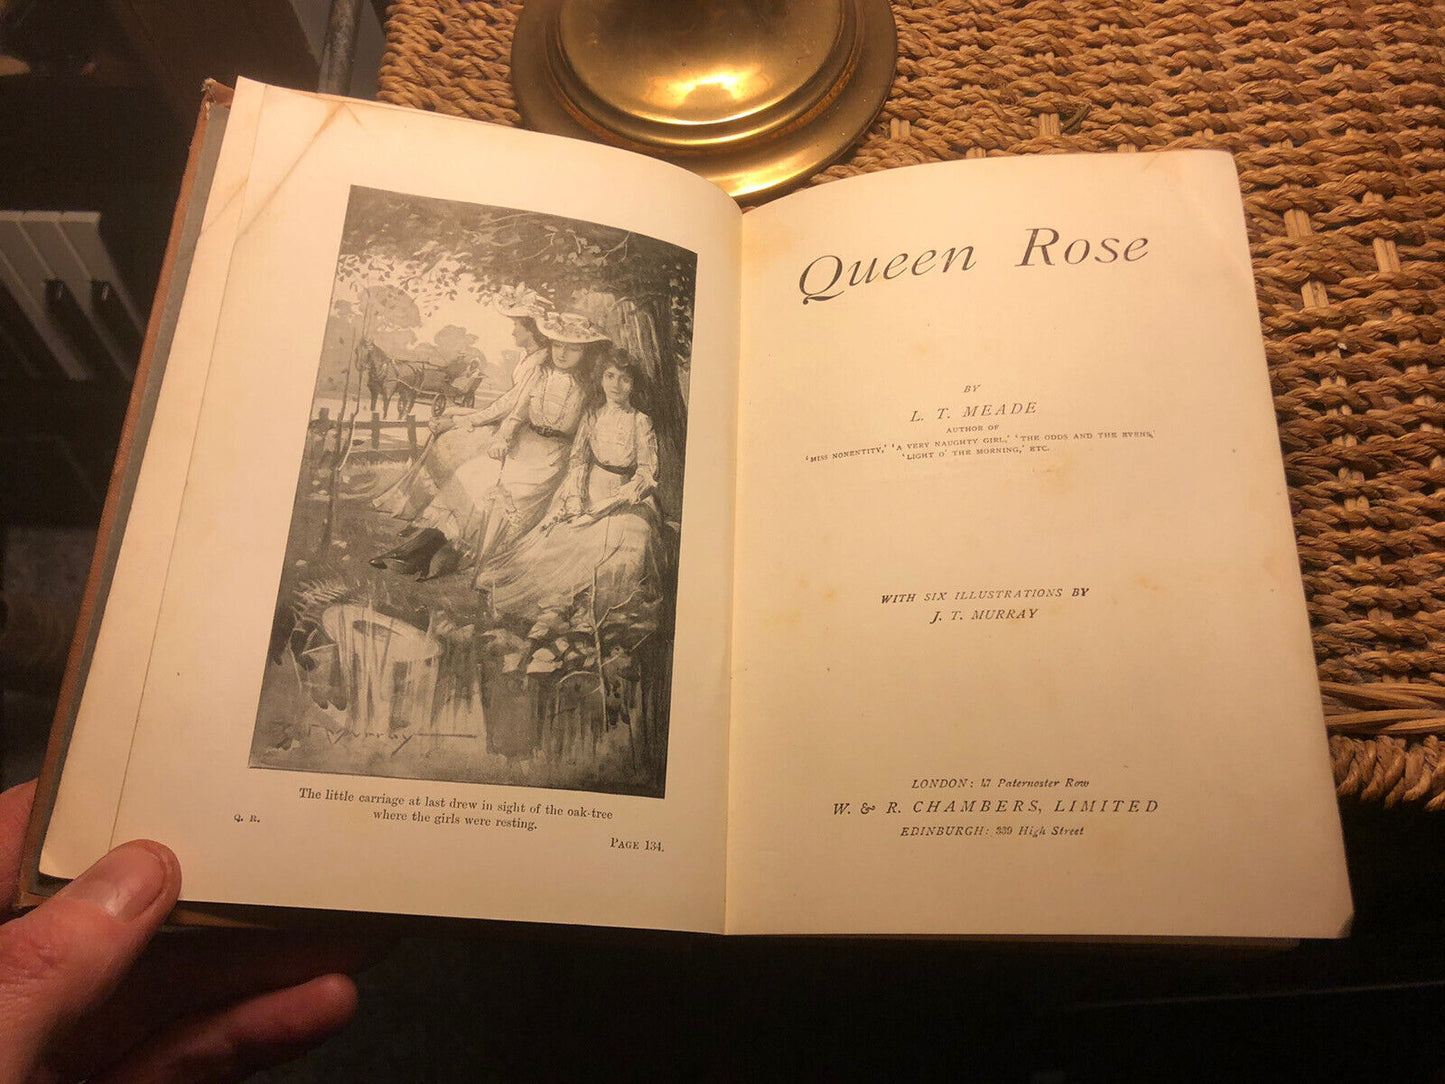 1896 L.T. Meade : Queen Rose : Lovely Decorative Binding JT Murray Illustrations